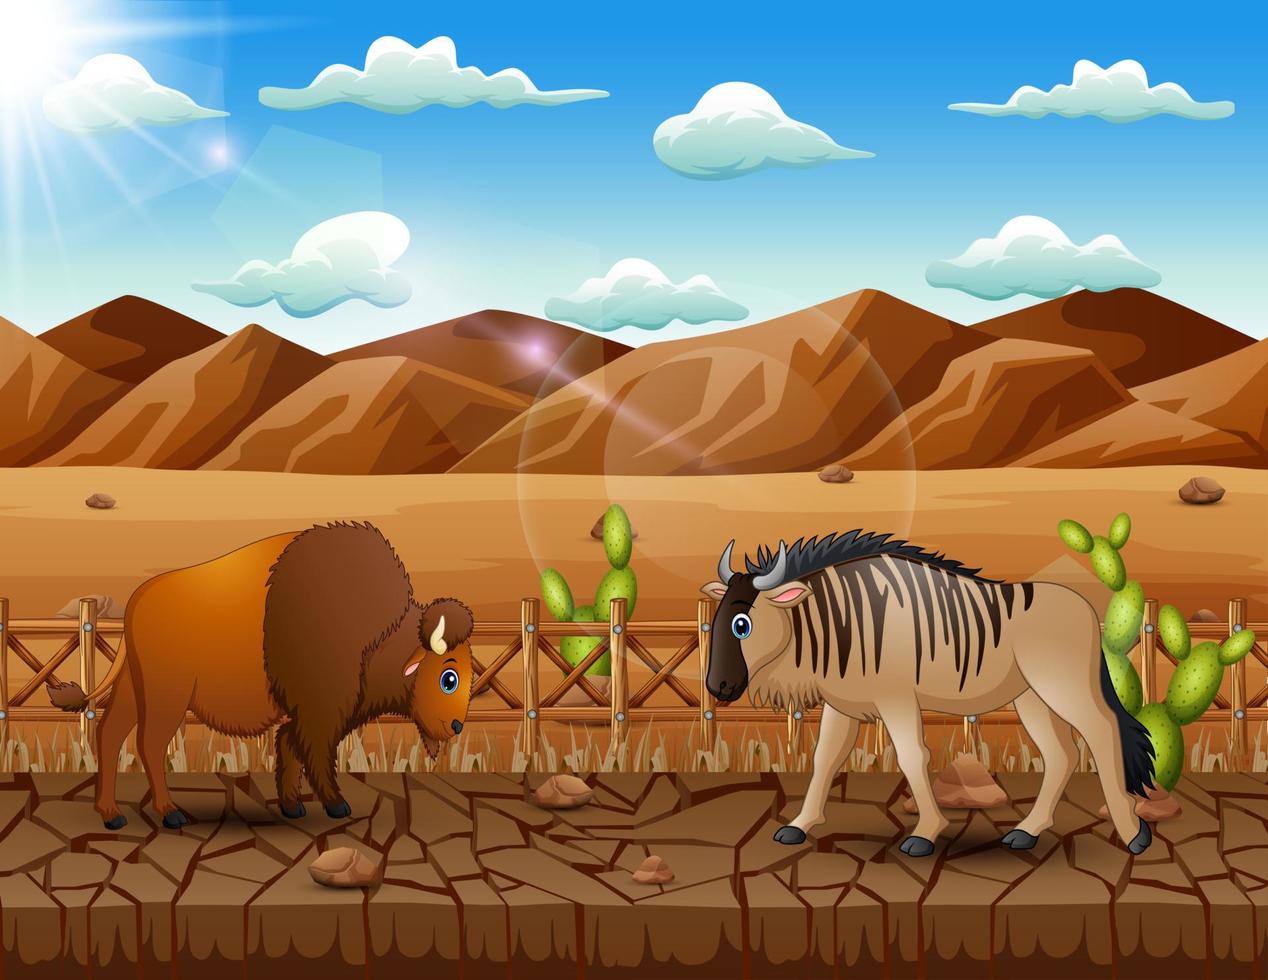 Cartoon a bison and wildebeest in the dry land landscape vector